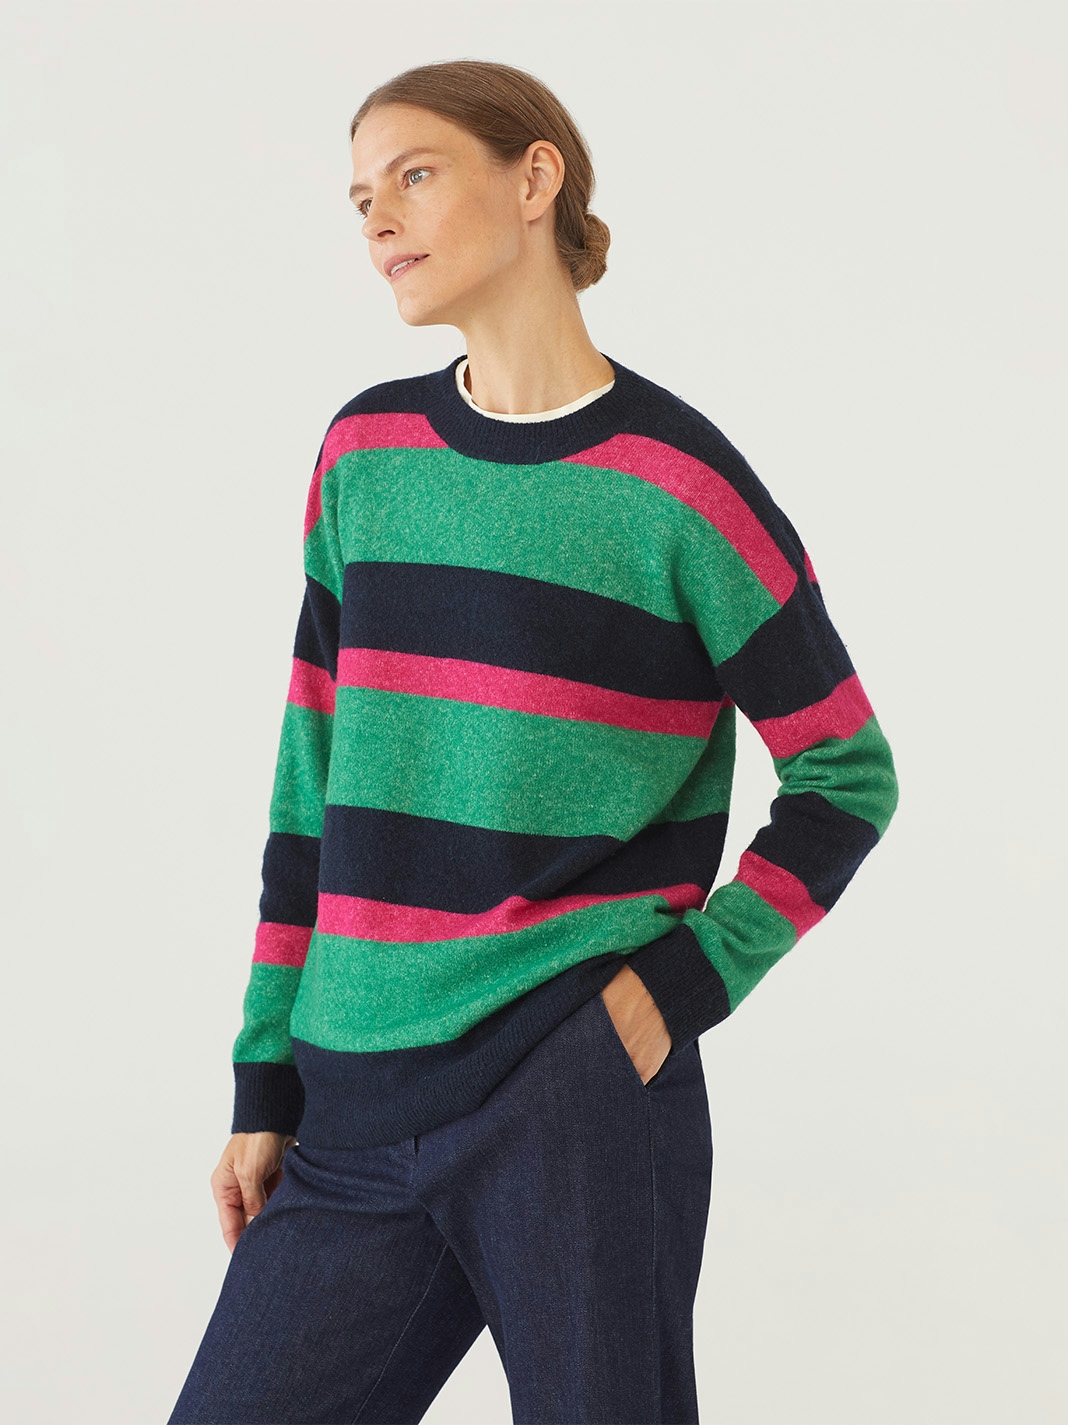 Ribbed striped sweater